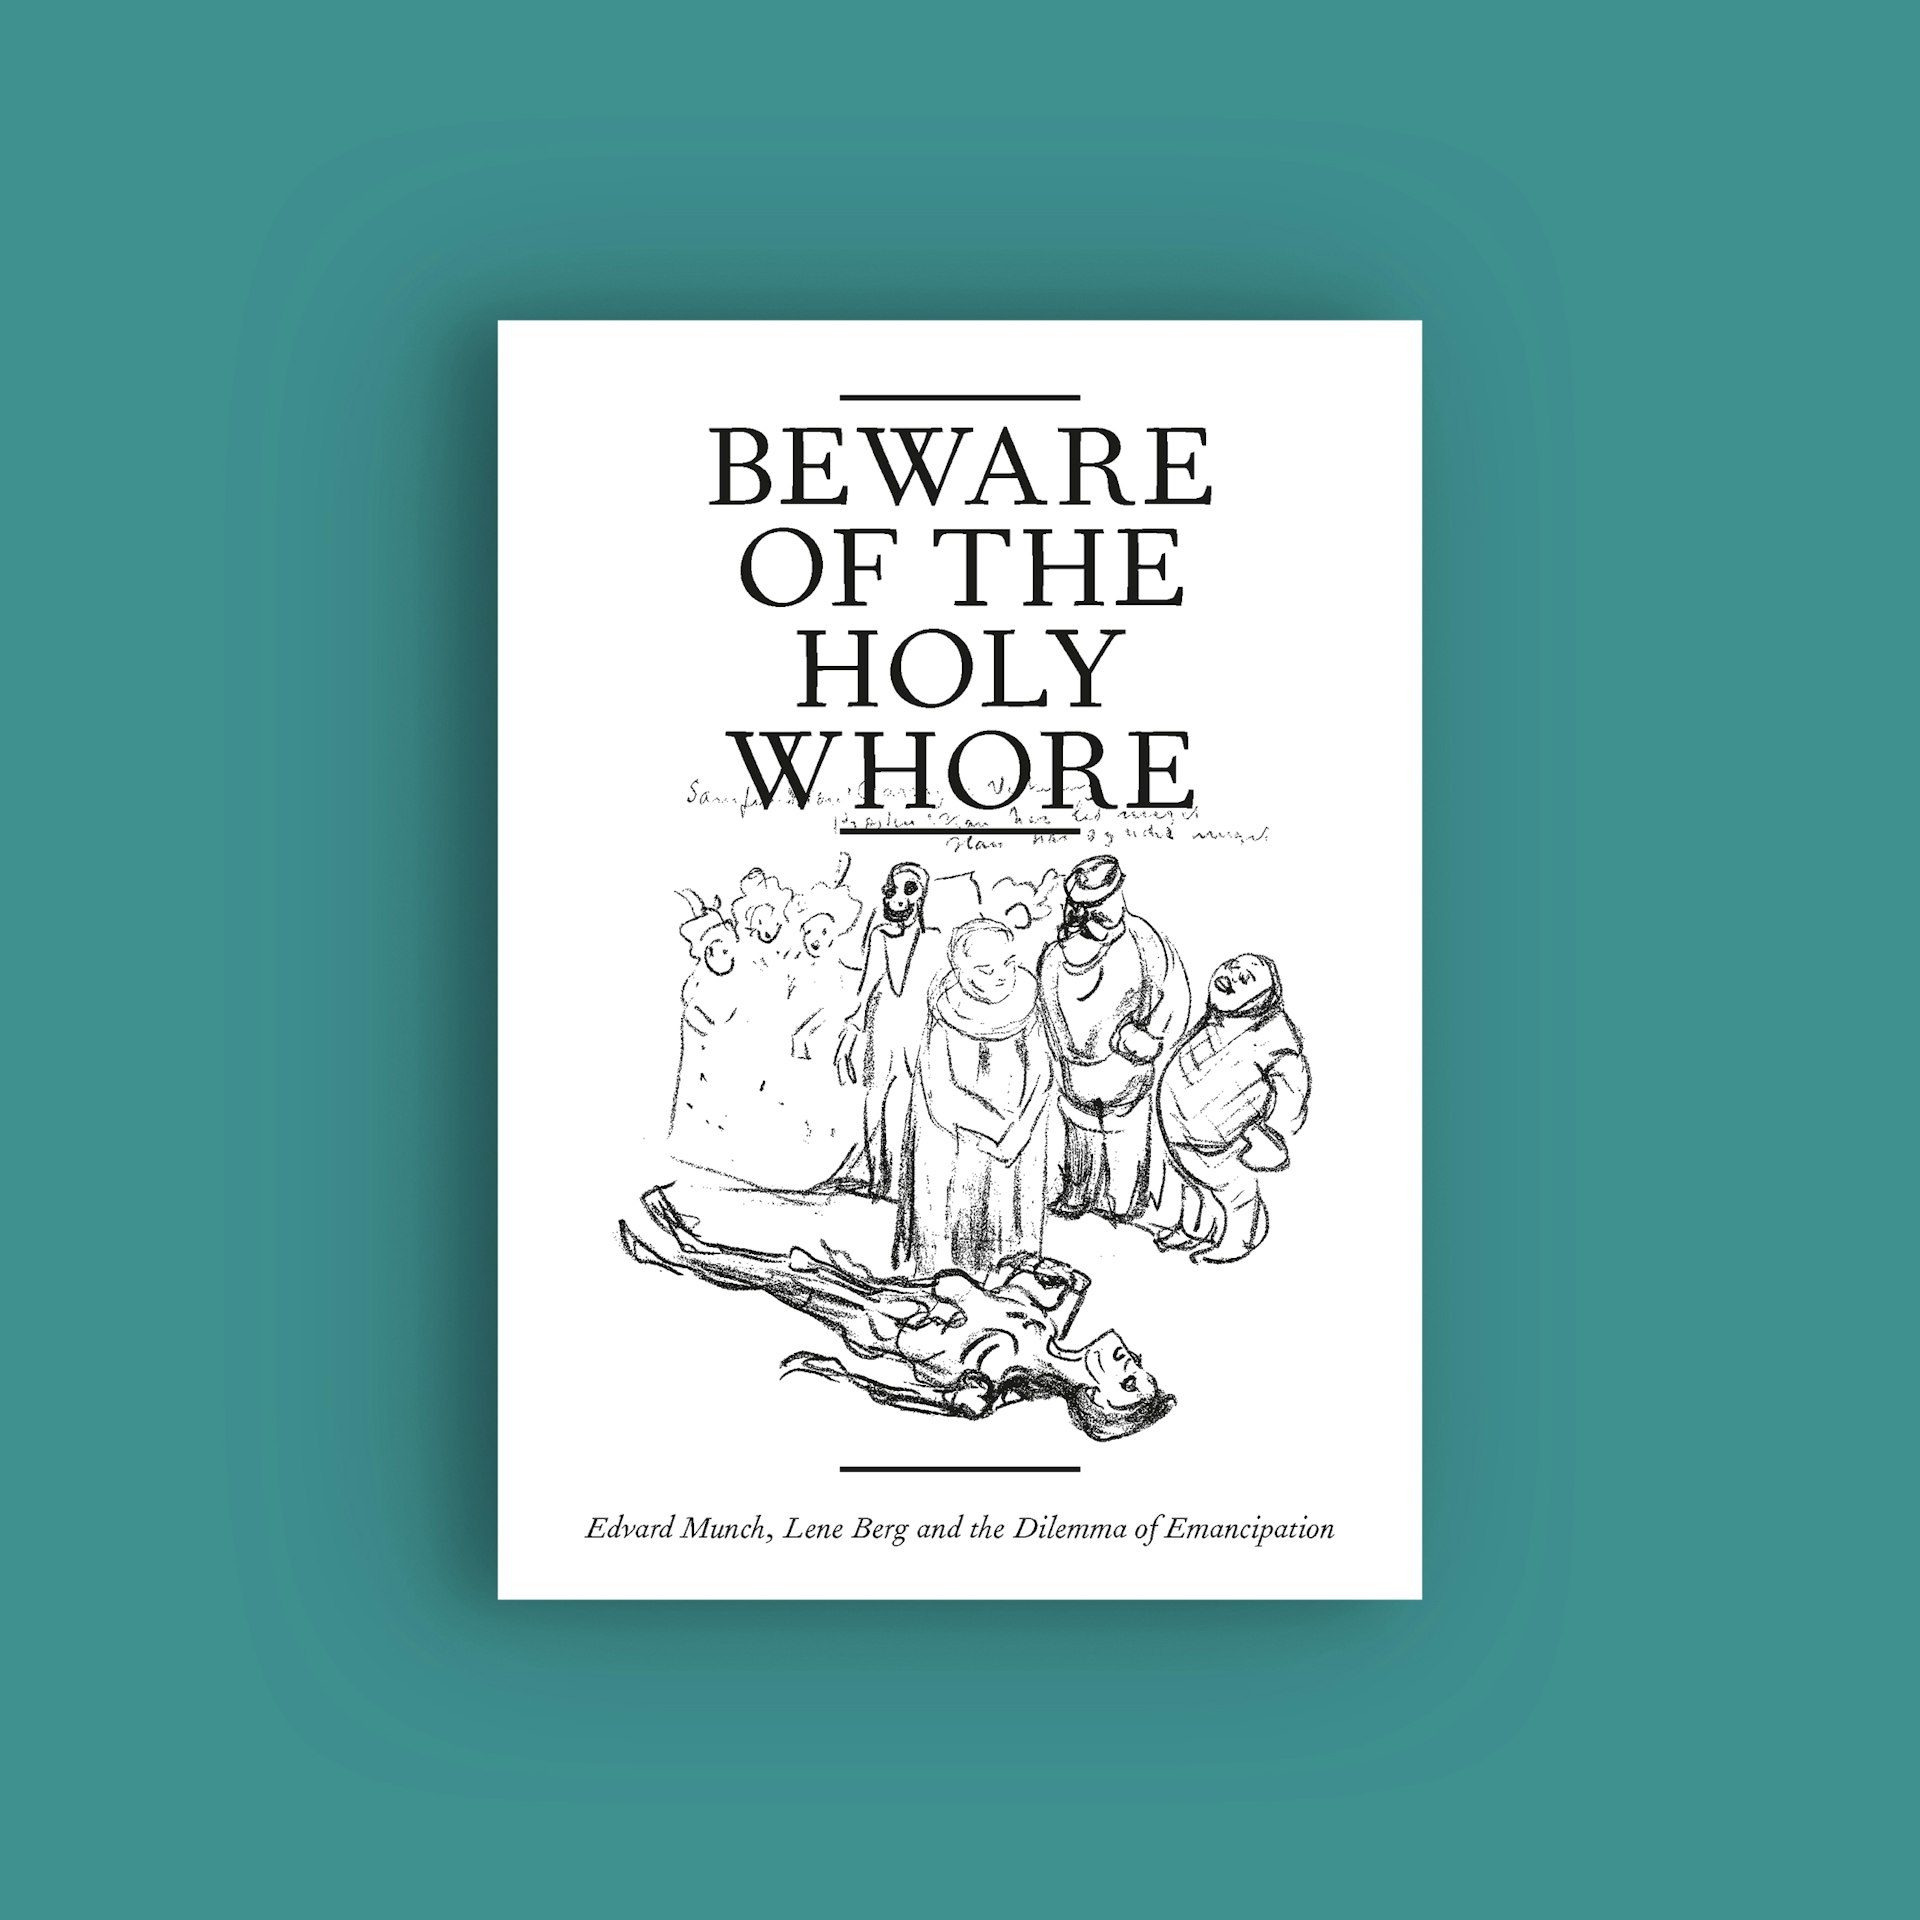 Beware of the Holy Whore